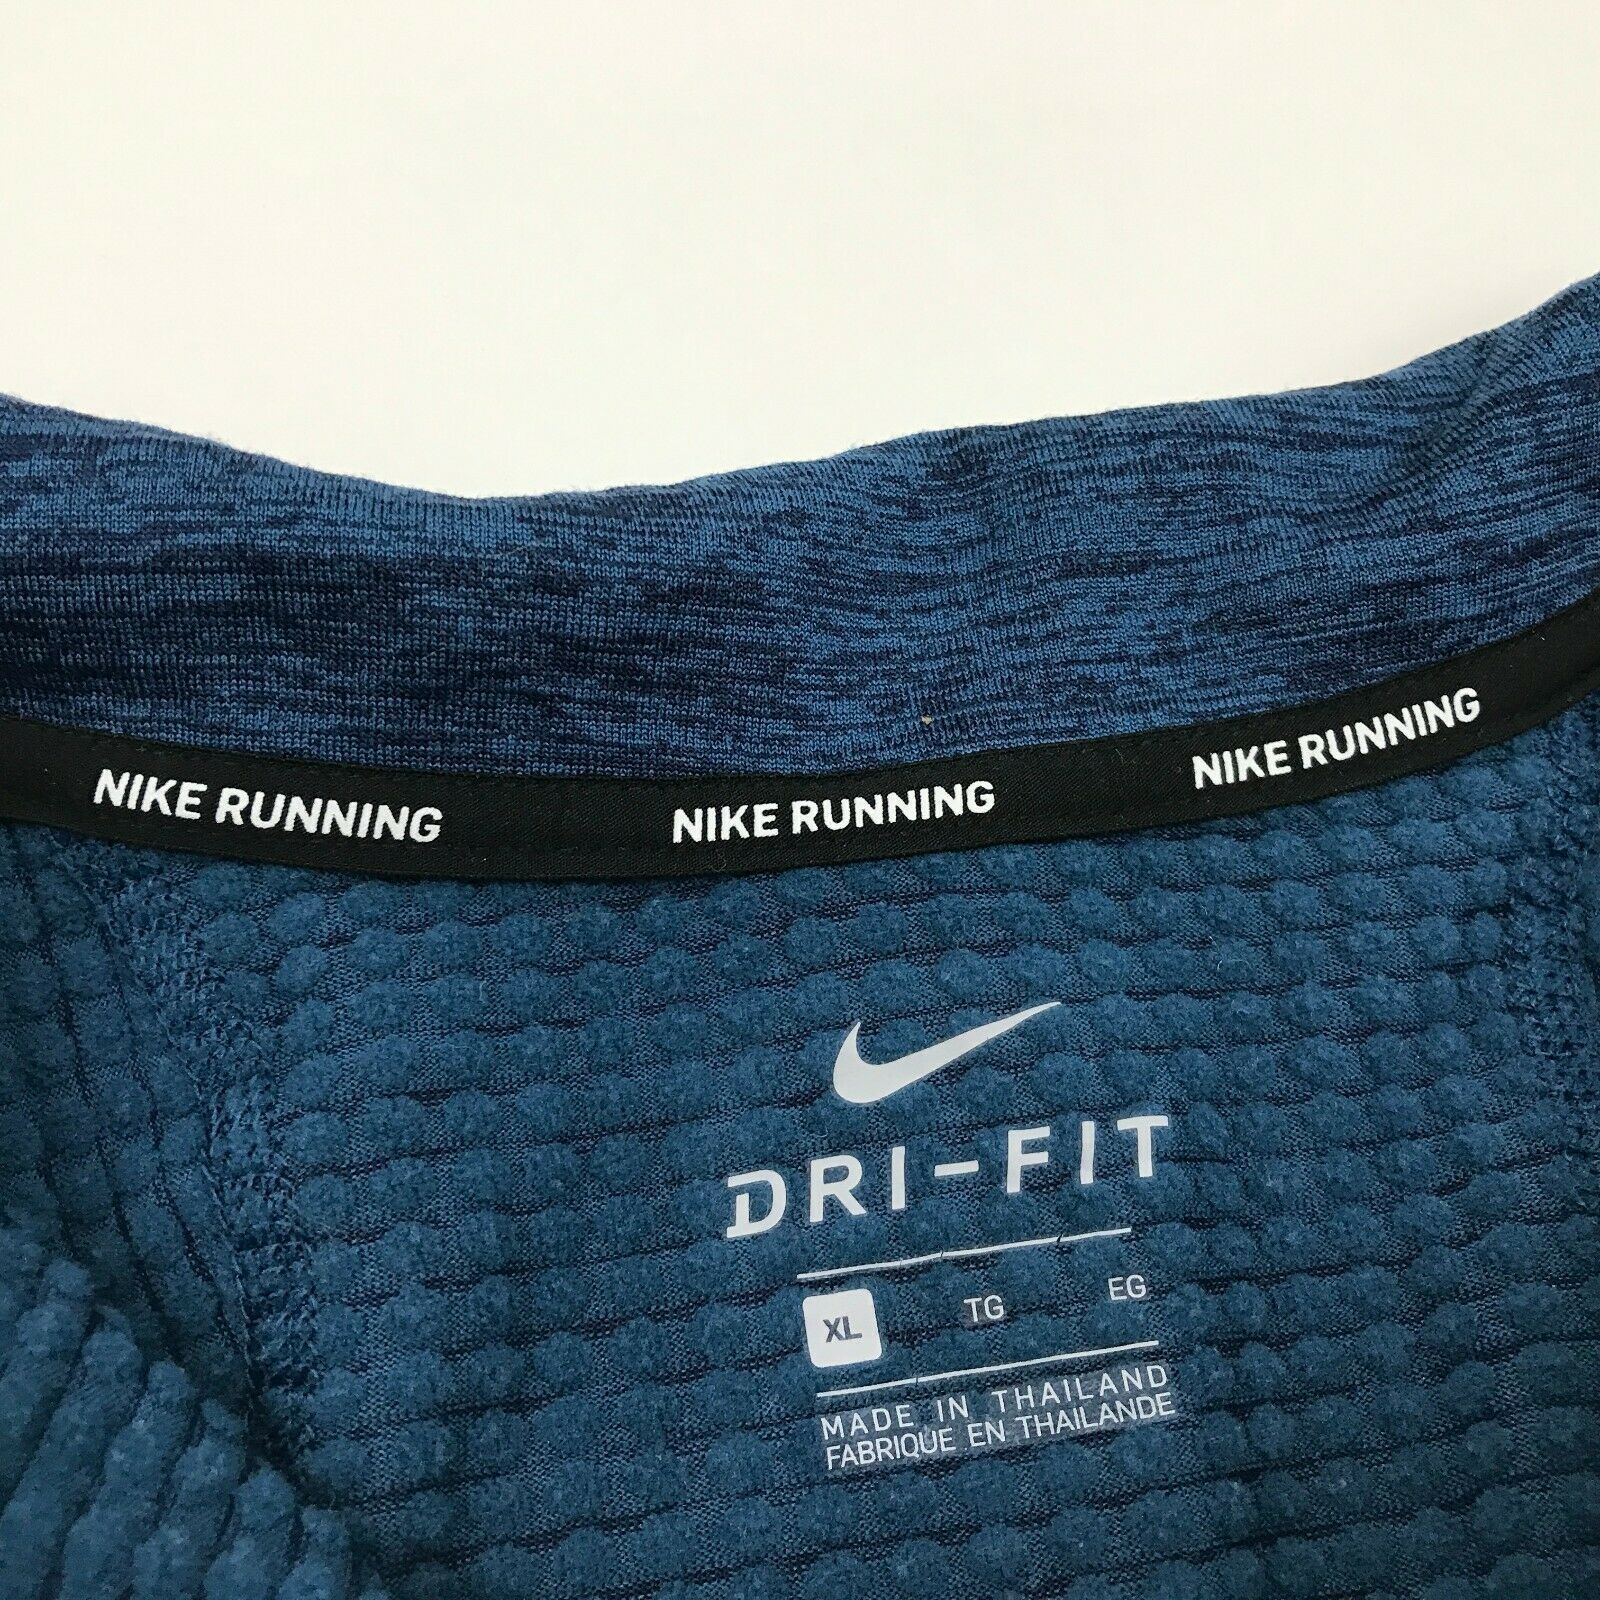 NIKE RUNNING Thermal Long Sleeve Dry Fit Shirt Men's Size Extra Large ...